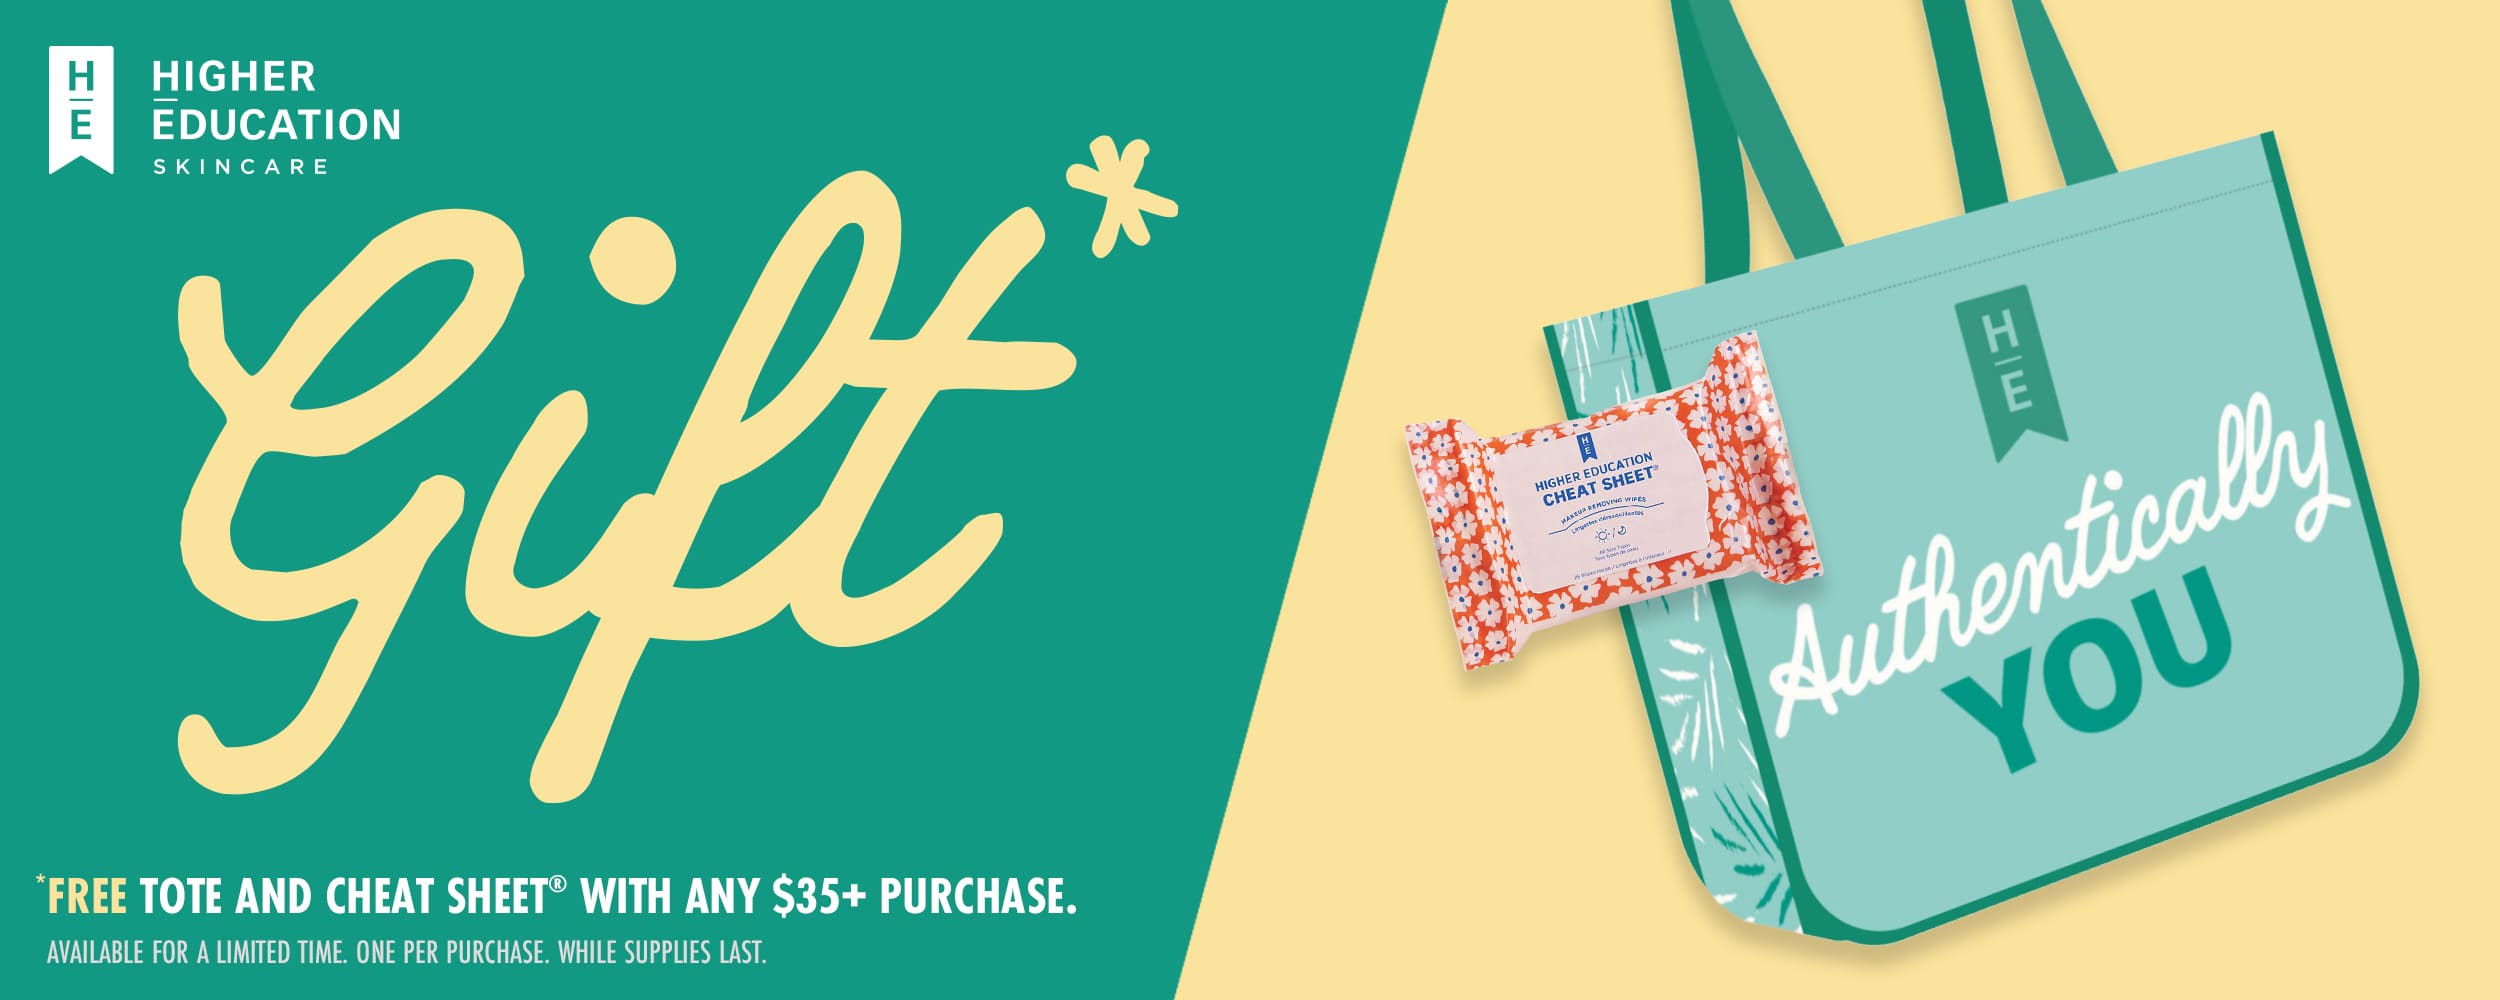 Free Tote and Cheet Sheet® with any $35+ Purchase. Available for a limited time. One per purchase. While supplies last.